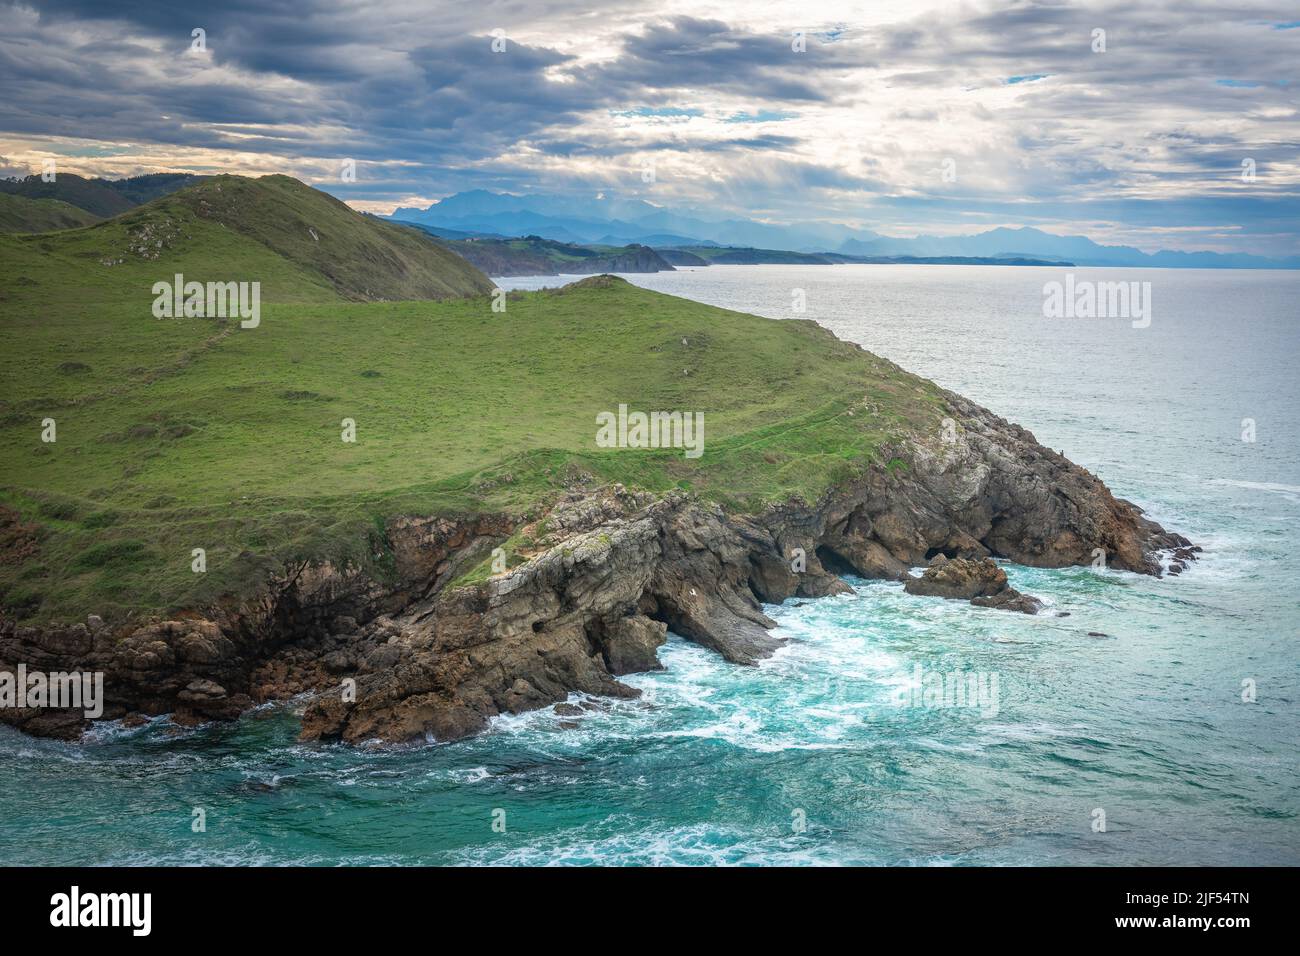 Cliffs over Cantabrian Sea, town of Ubiarco in Cantabria, Spain Stock Photo